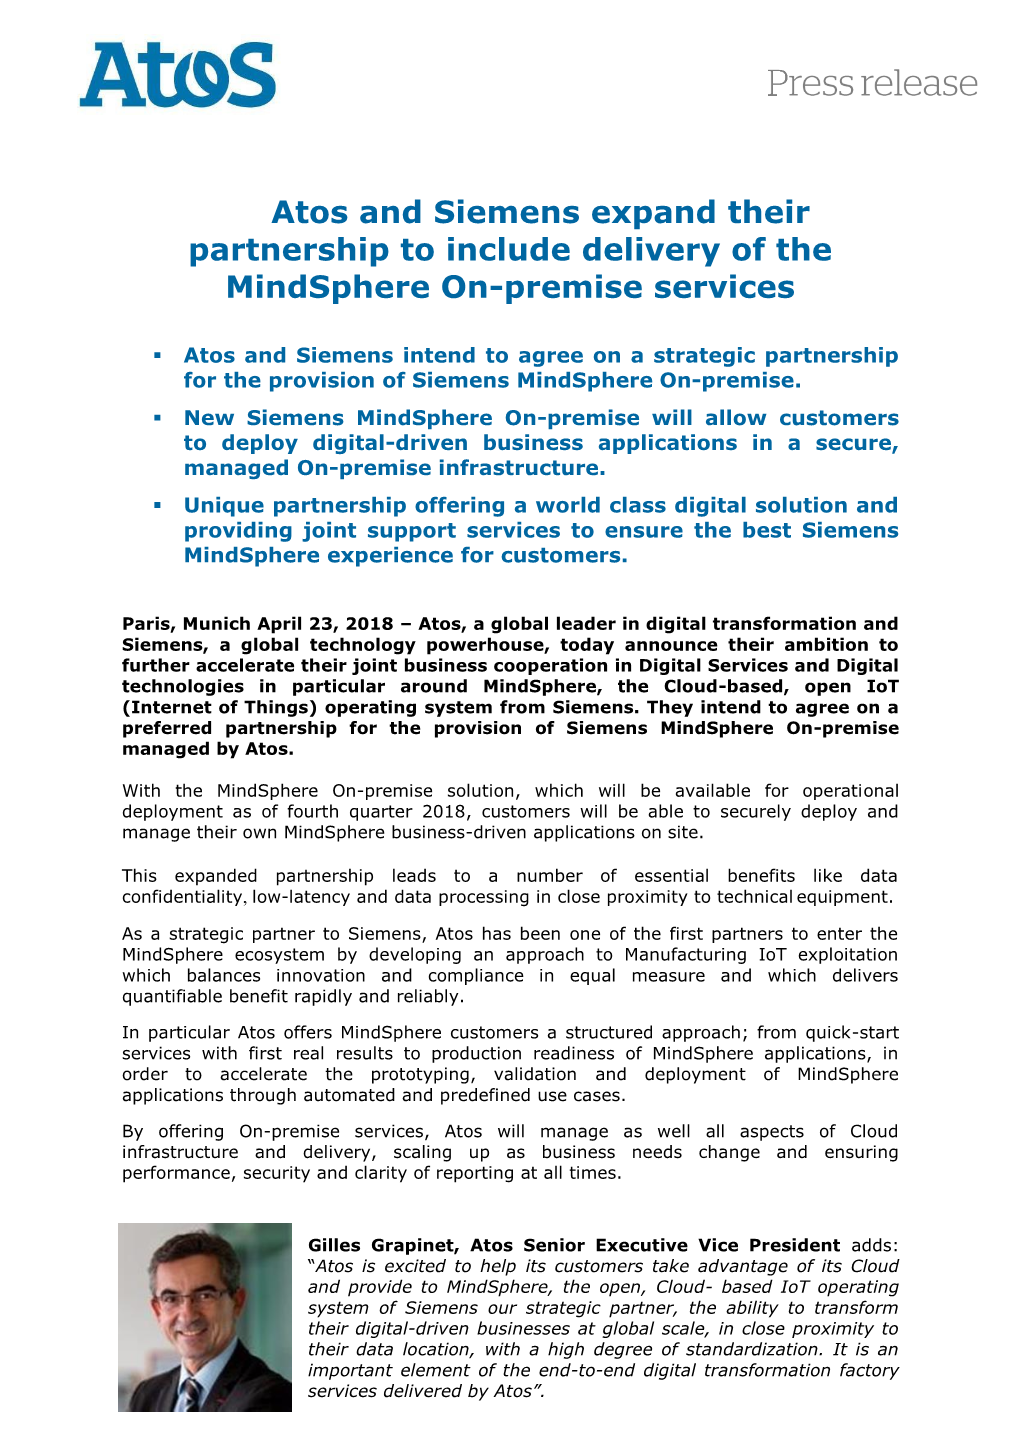 Atos and Siemens Expand Their Partnership to Include Delivery of the Mindsphere On-Premise Services